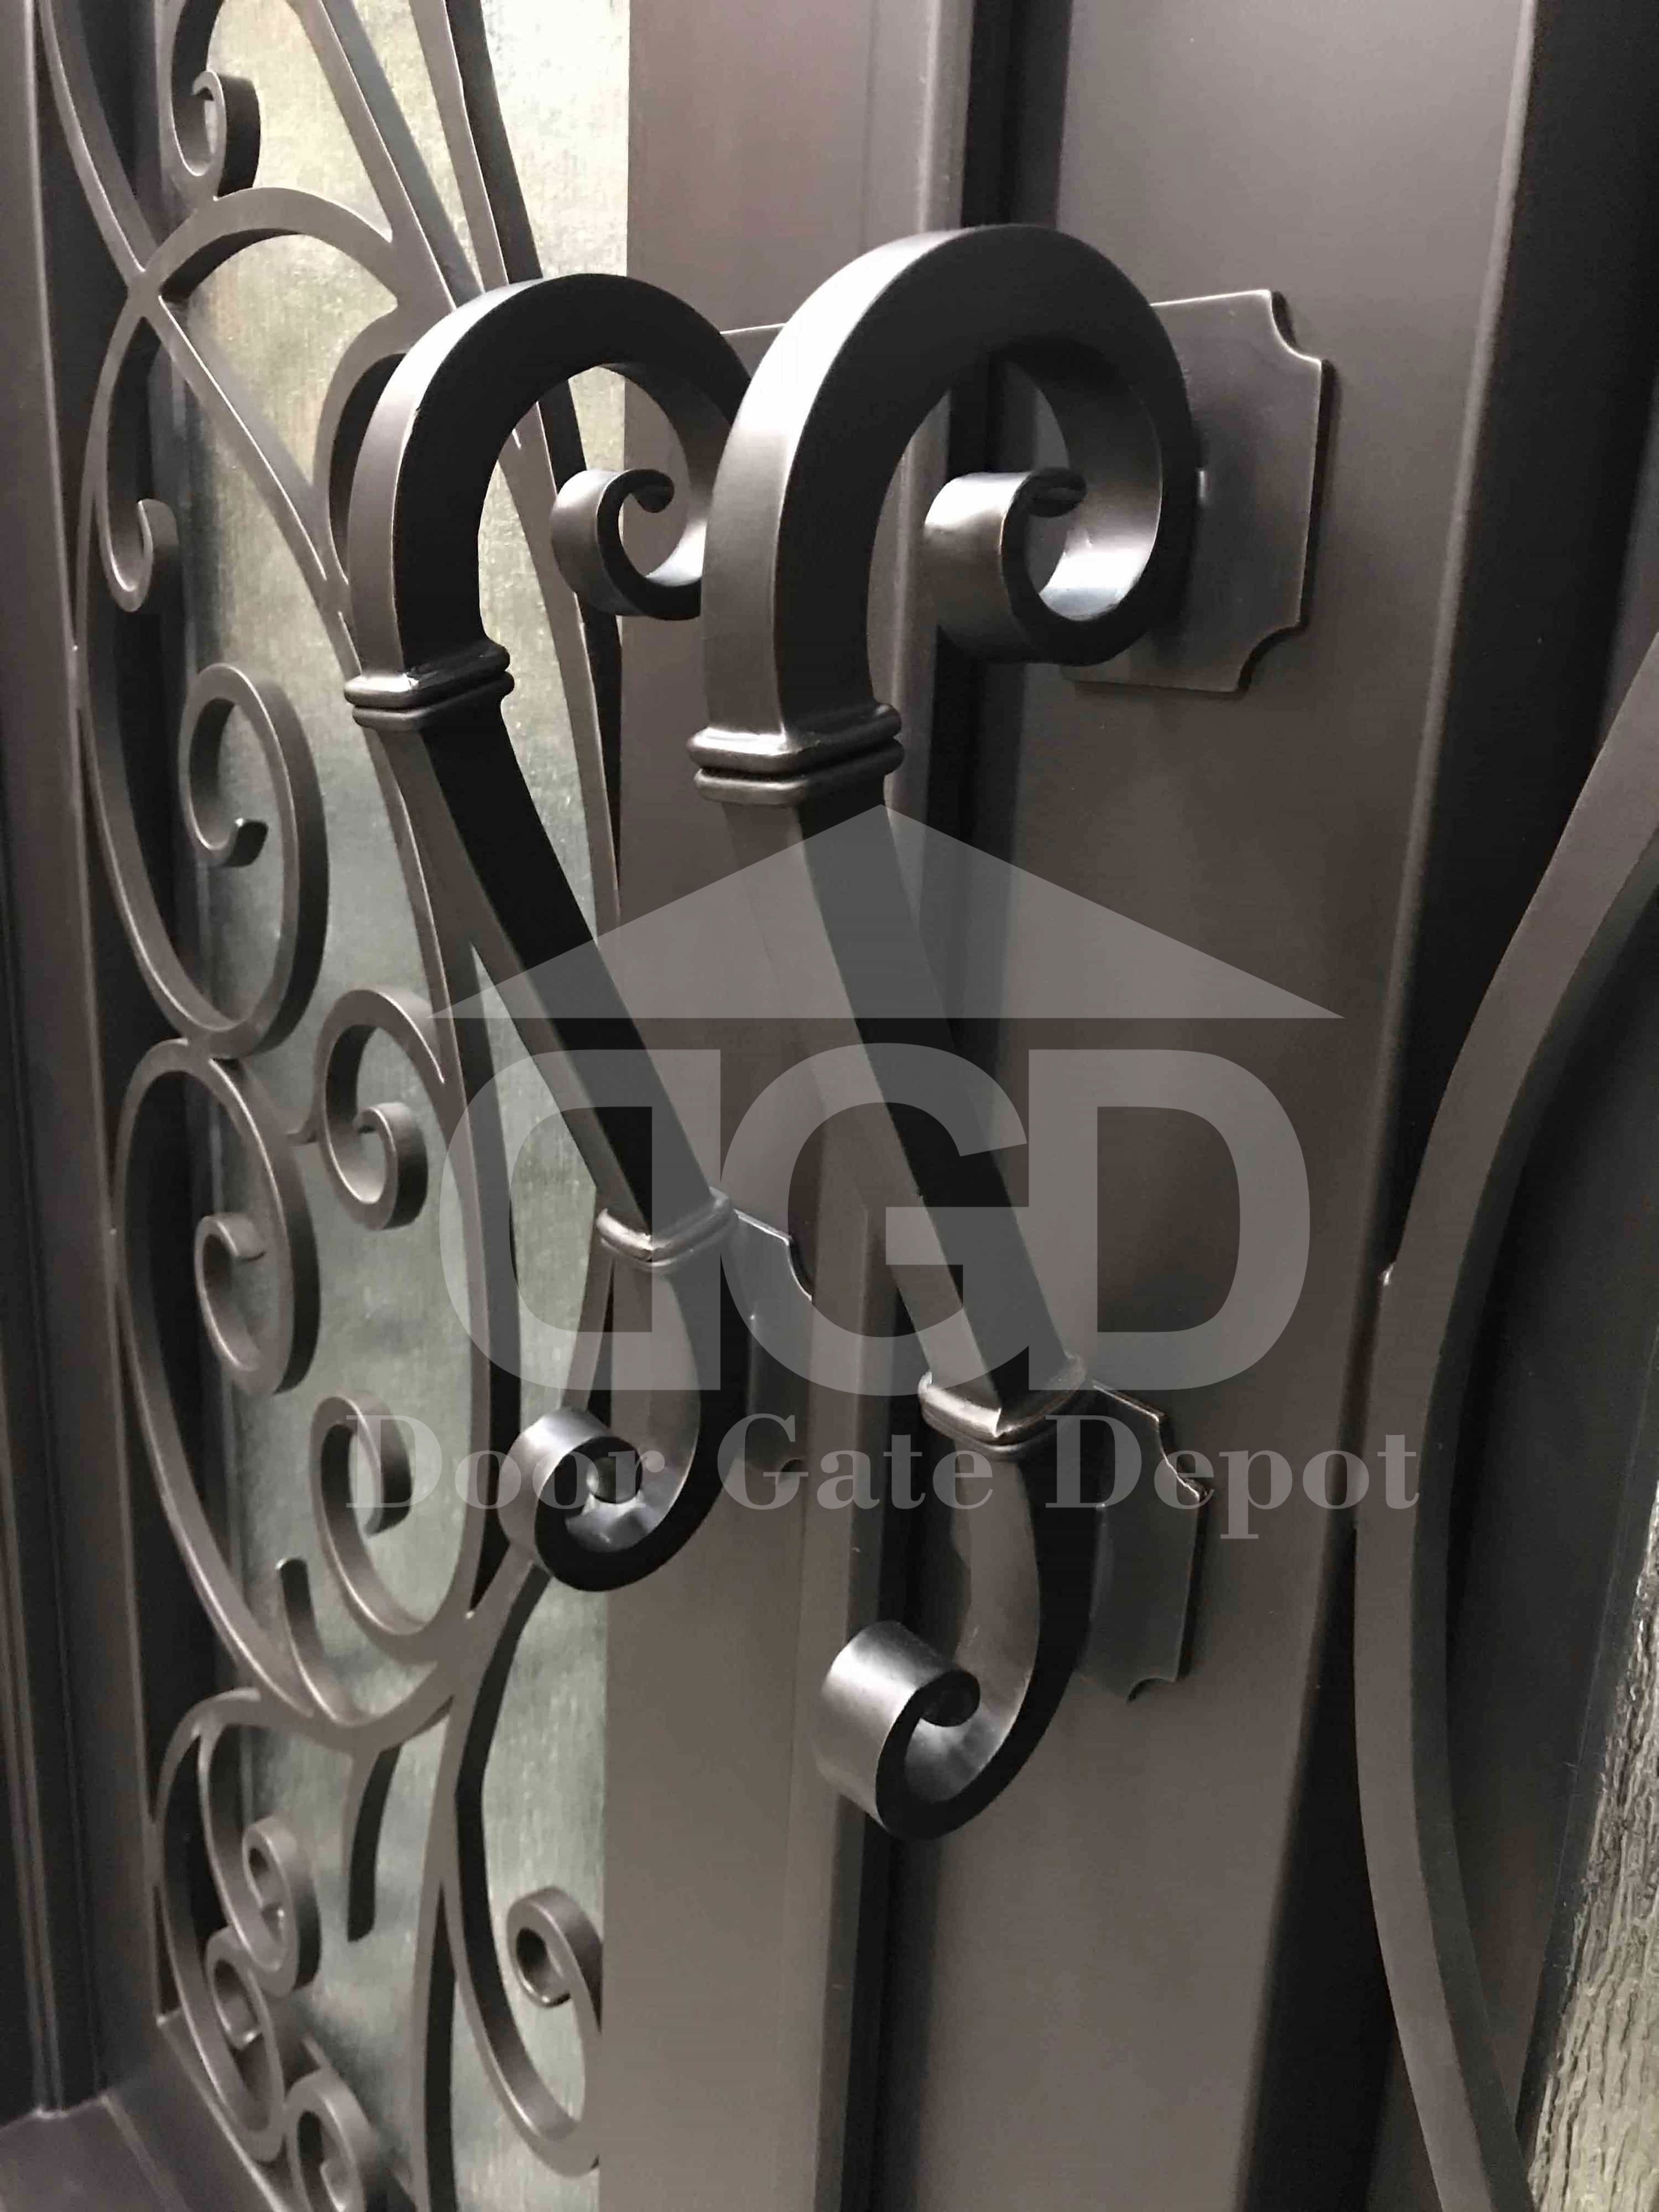 AZALEA- Iron Square top,  Front Entry Wrought Iron Doors, Bug Screens, Tempered glass,  72x96- Right Hand - Door Gate Depot